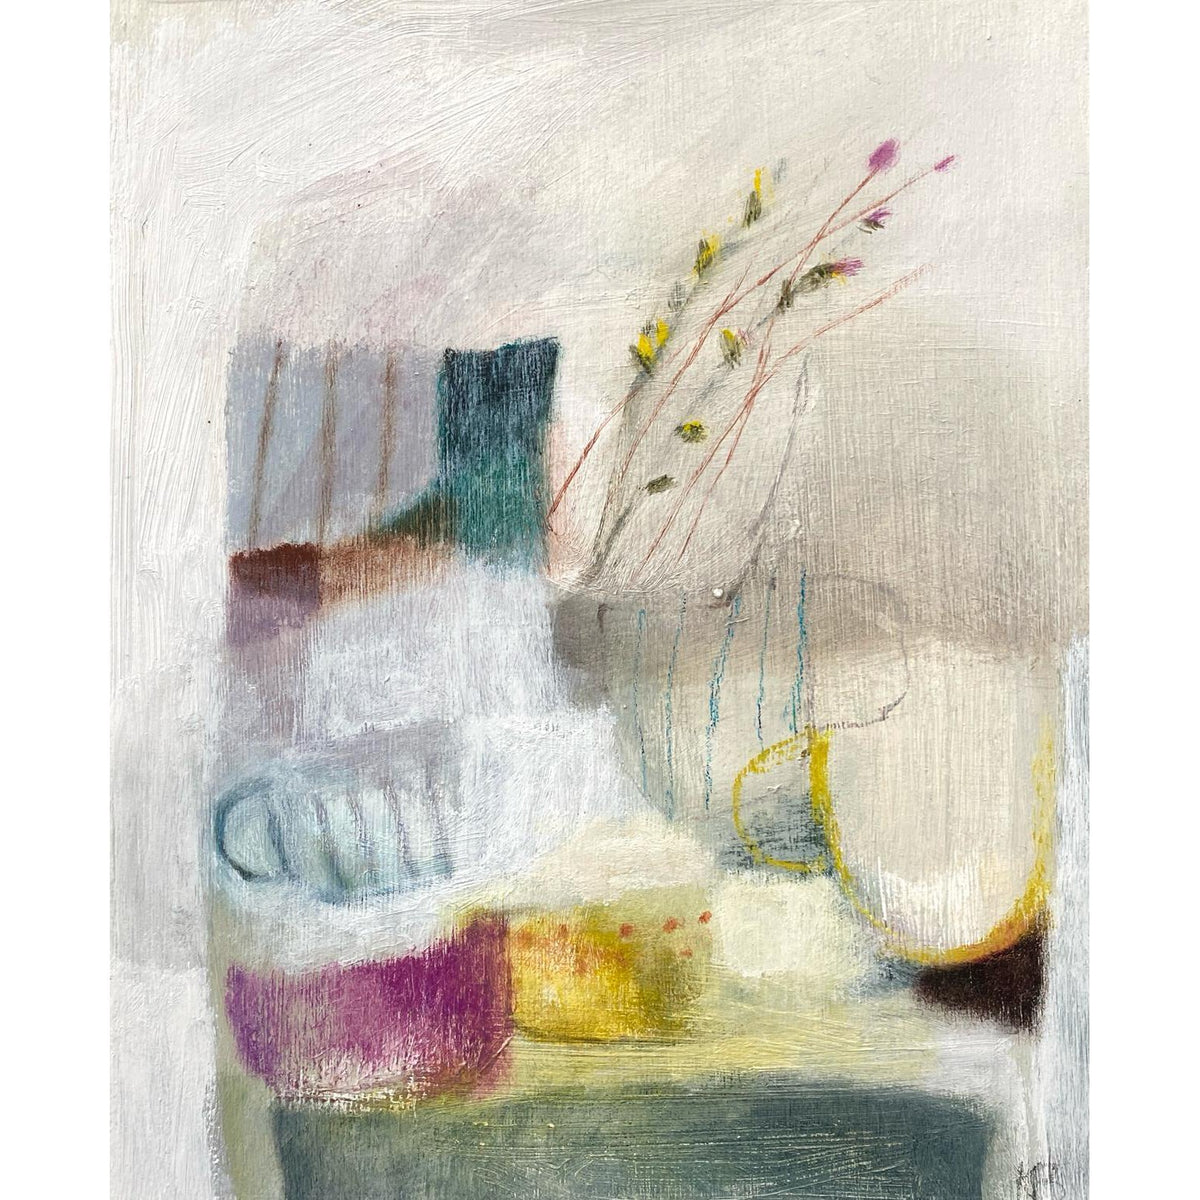 ‘Pink and Yellow Cups’ mixed media and collage on board, by Karen Birchwood, available at Padstow Gallery, Cornwall